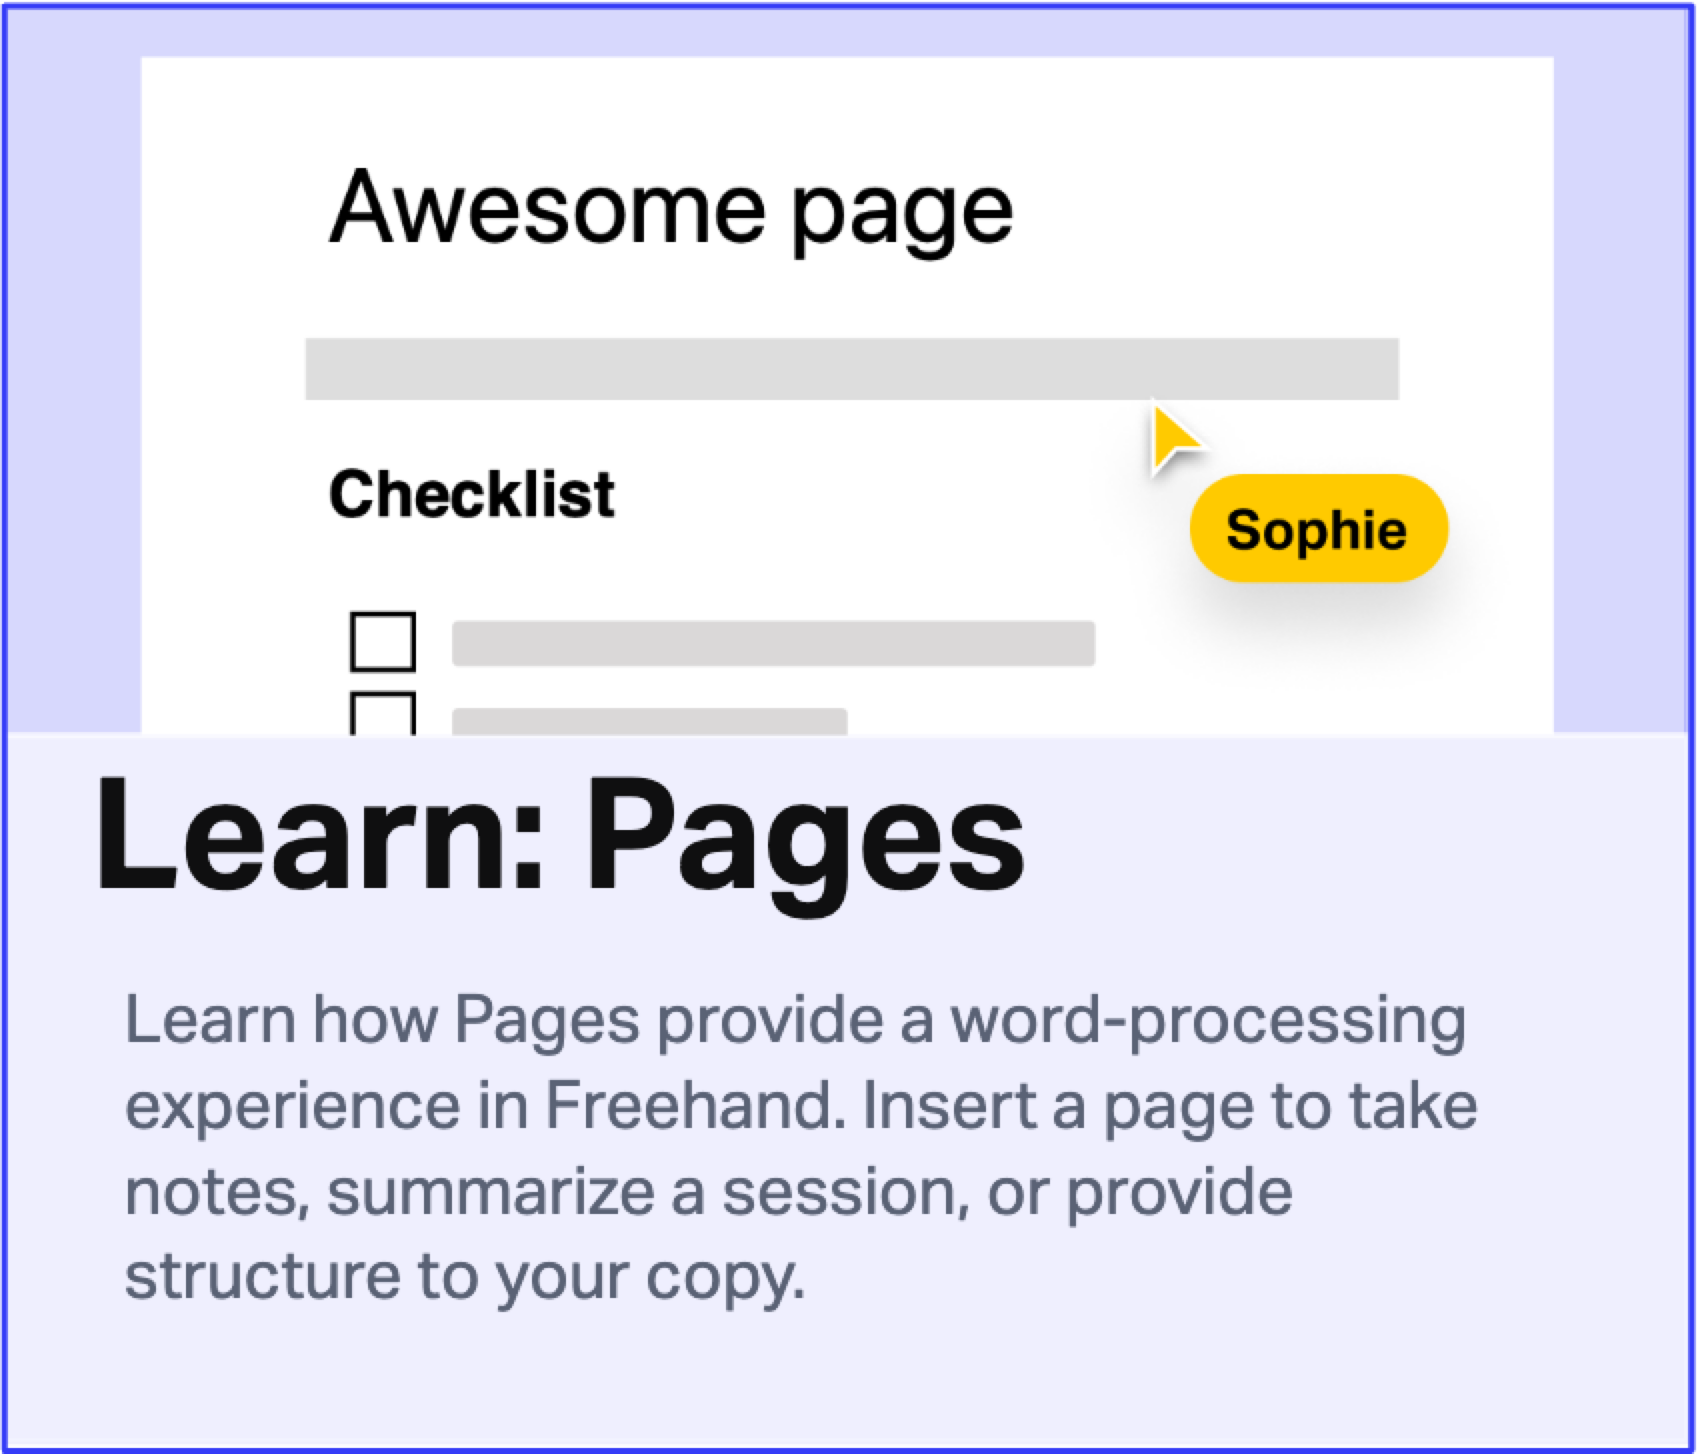 Template to learn how to use Pages in Freehand